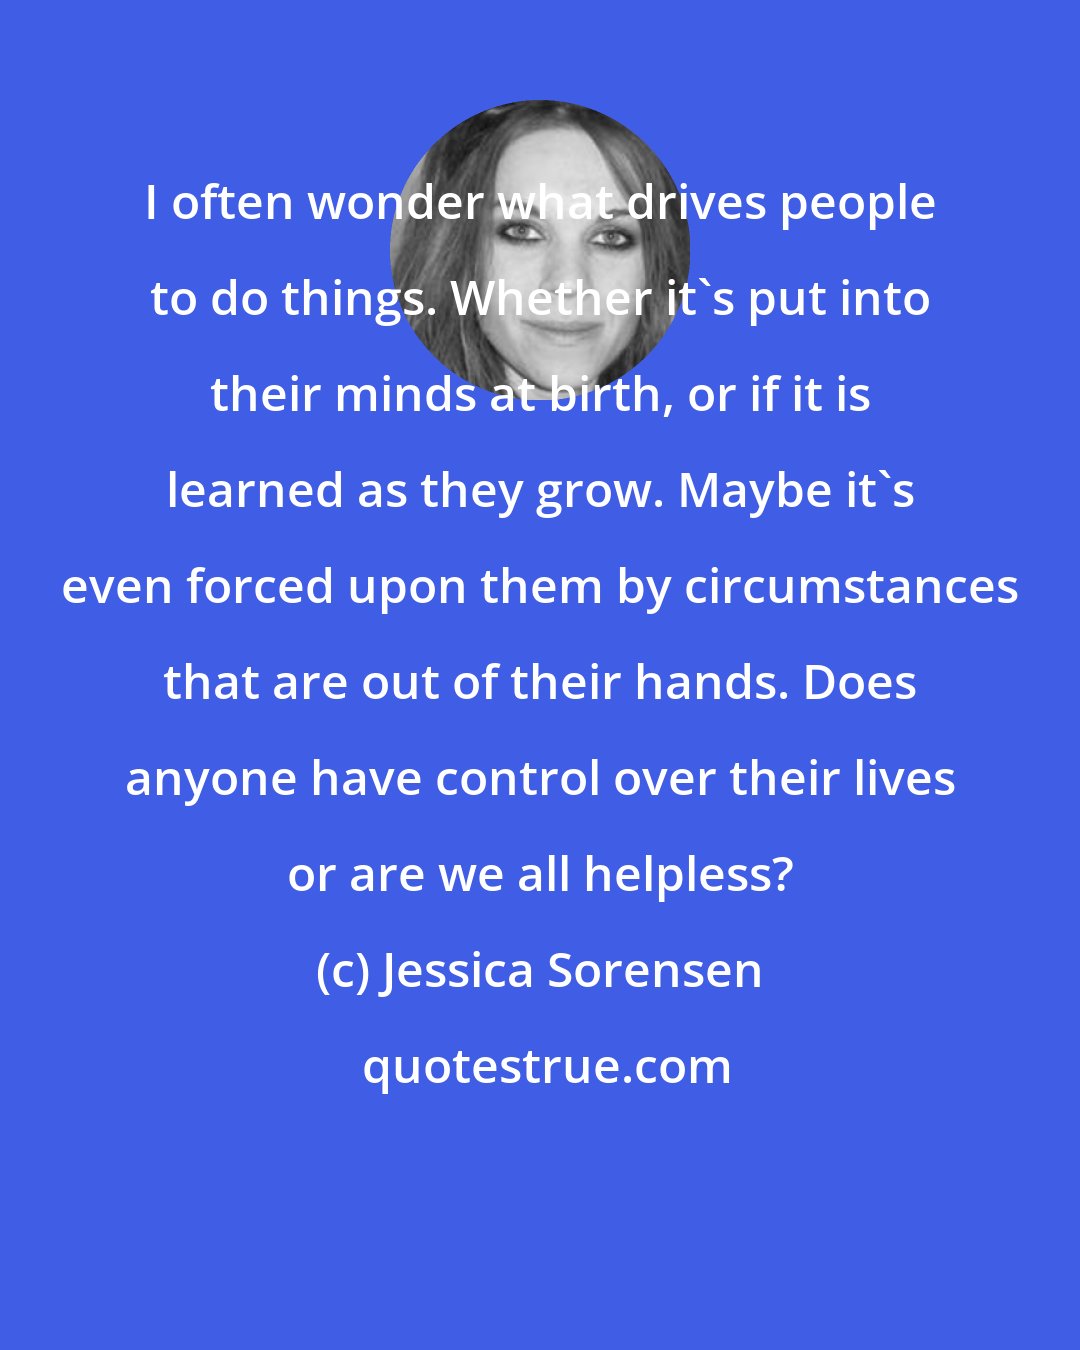 Jessica Sorensen: I often wonder what drives people to do things. Whether it's put into their minds at birth, or if it is learned as they grow. Maybe it's even forced upon them by circumstances that are out of their hands. Does anyone have control over their lives or are we all helpless?